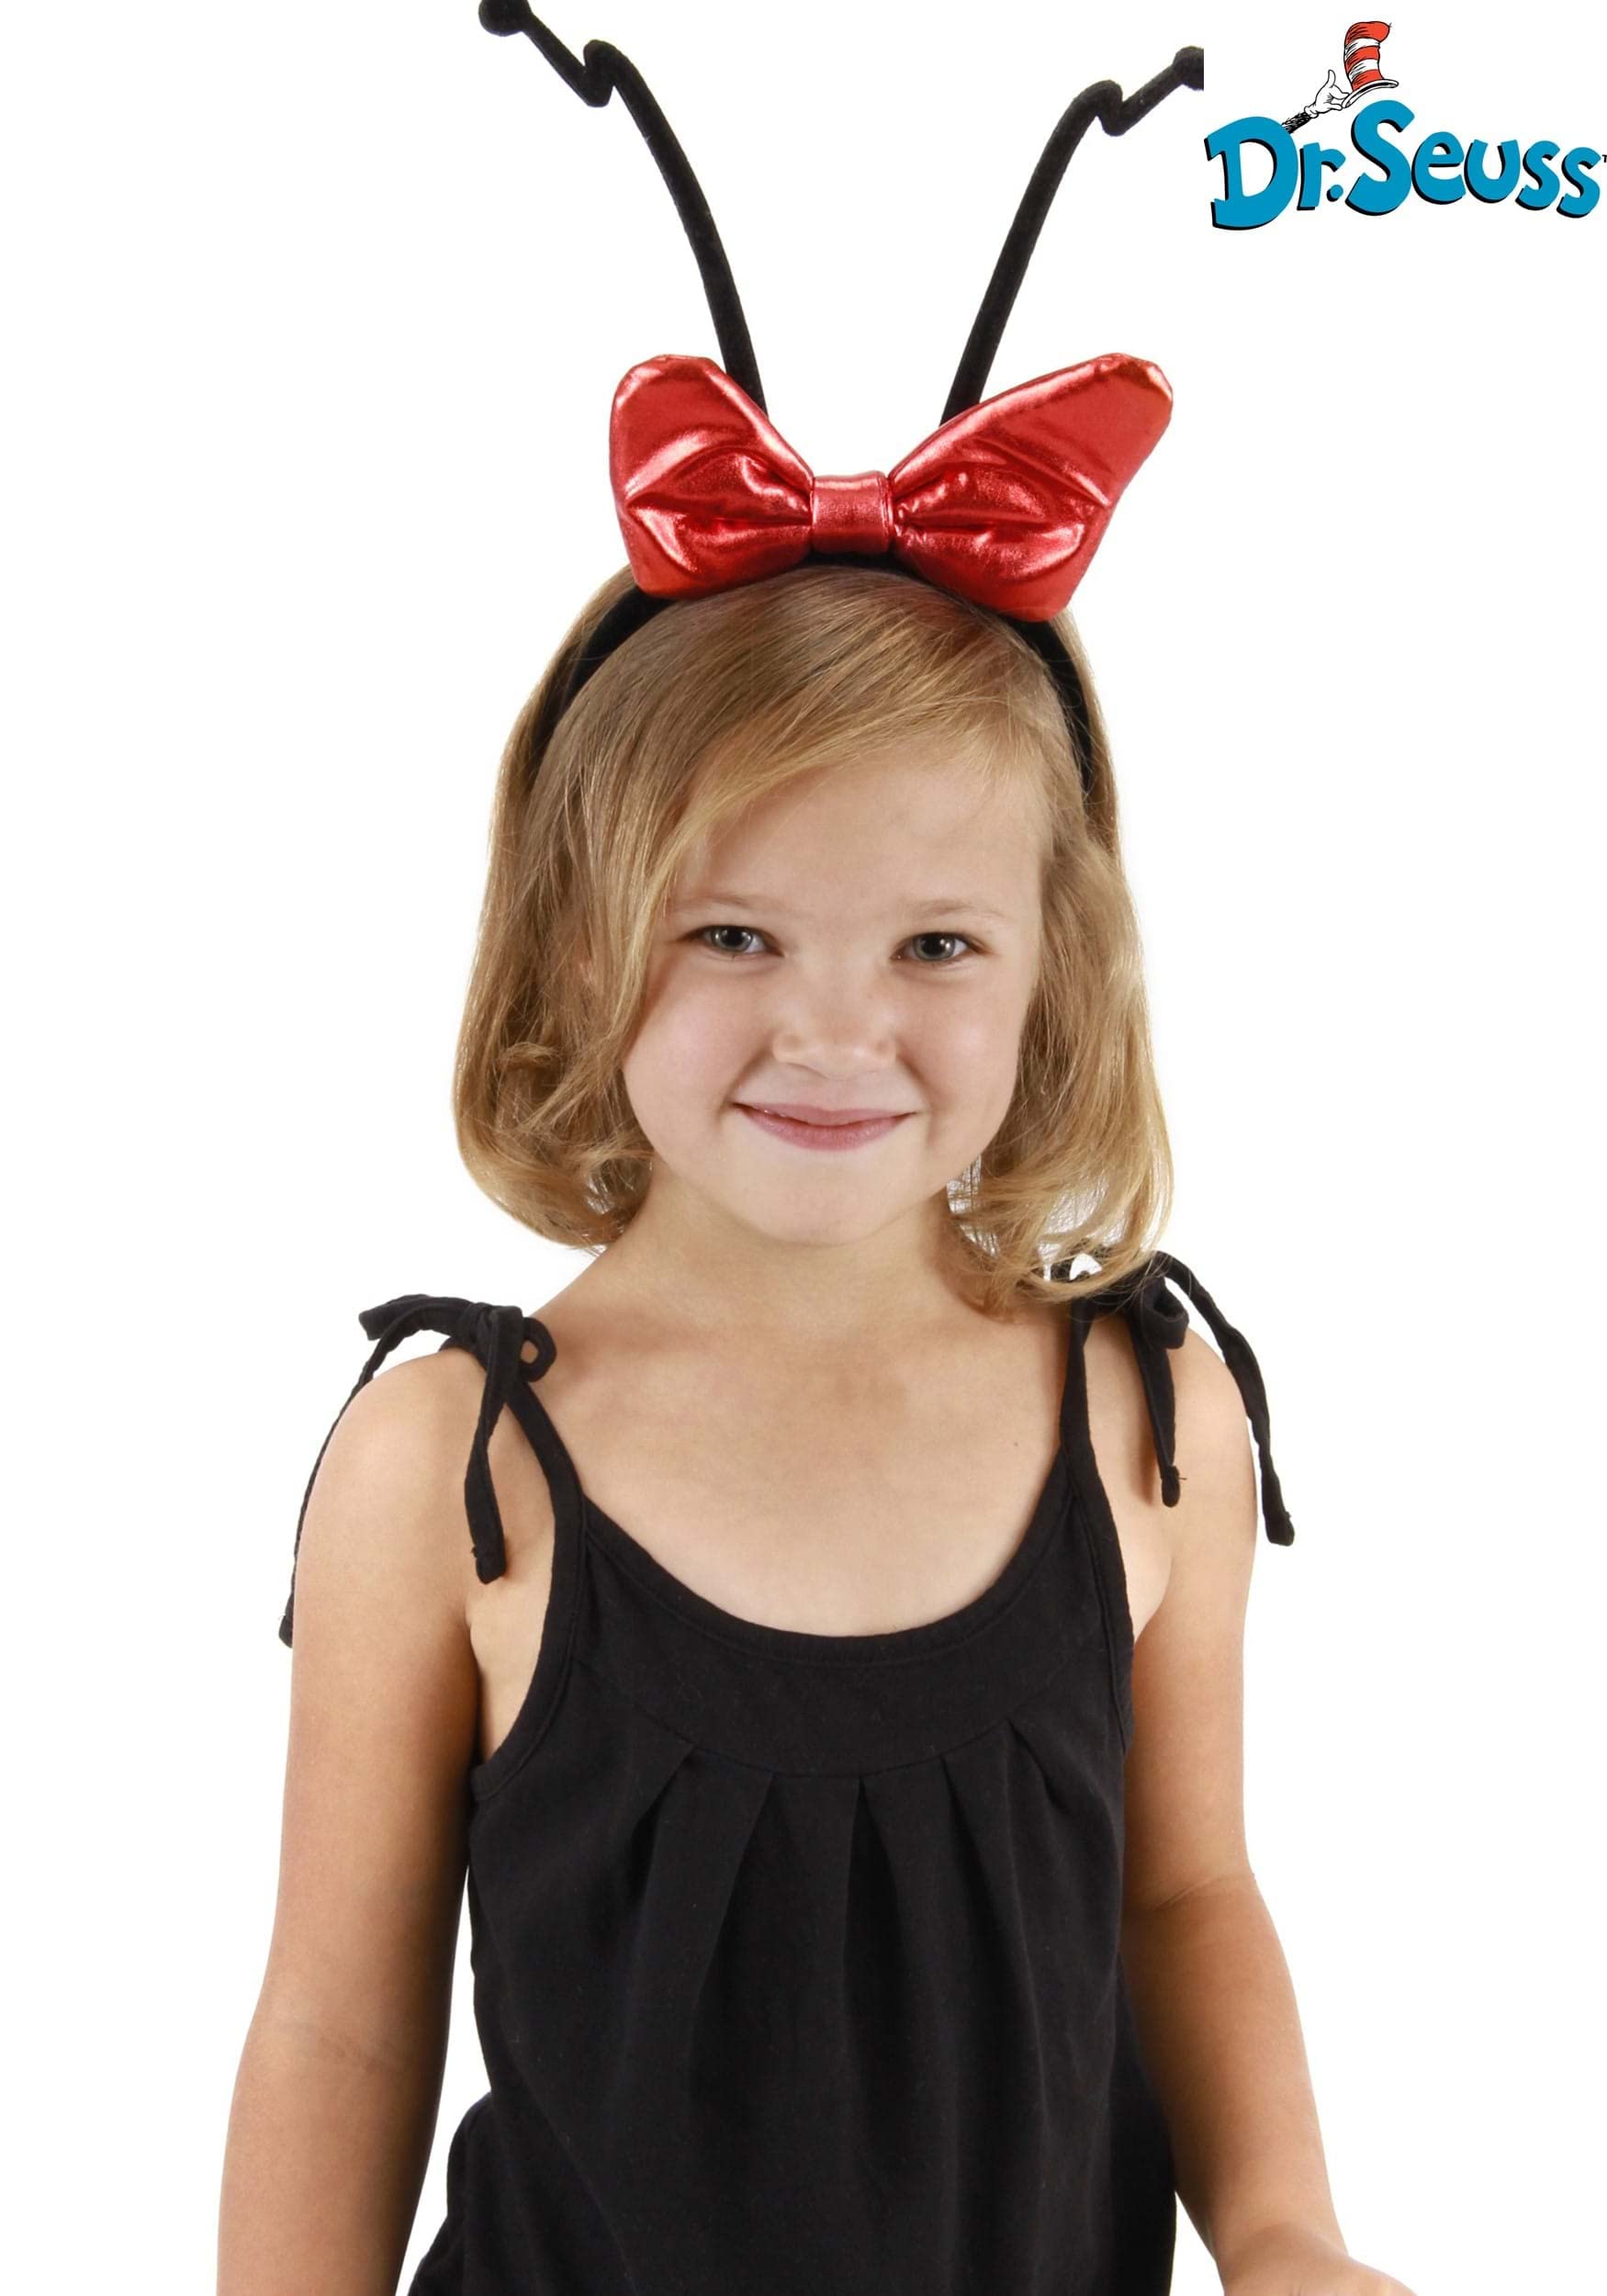 Dr. Seuss Grinch Cindy Lou Who Deluxe Costume Headband